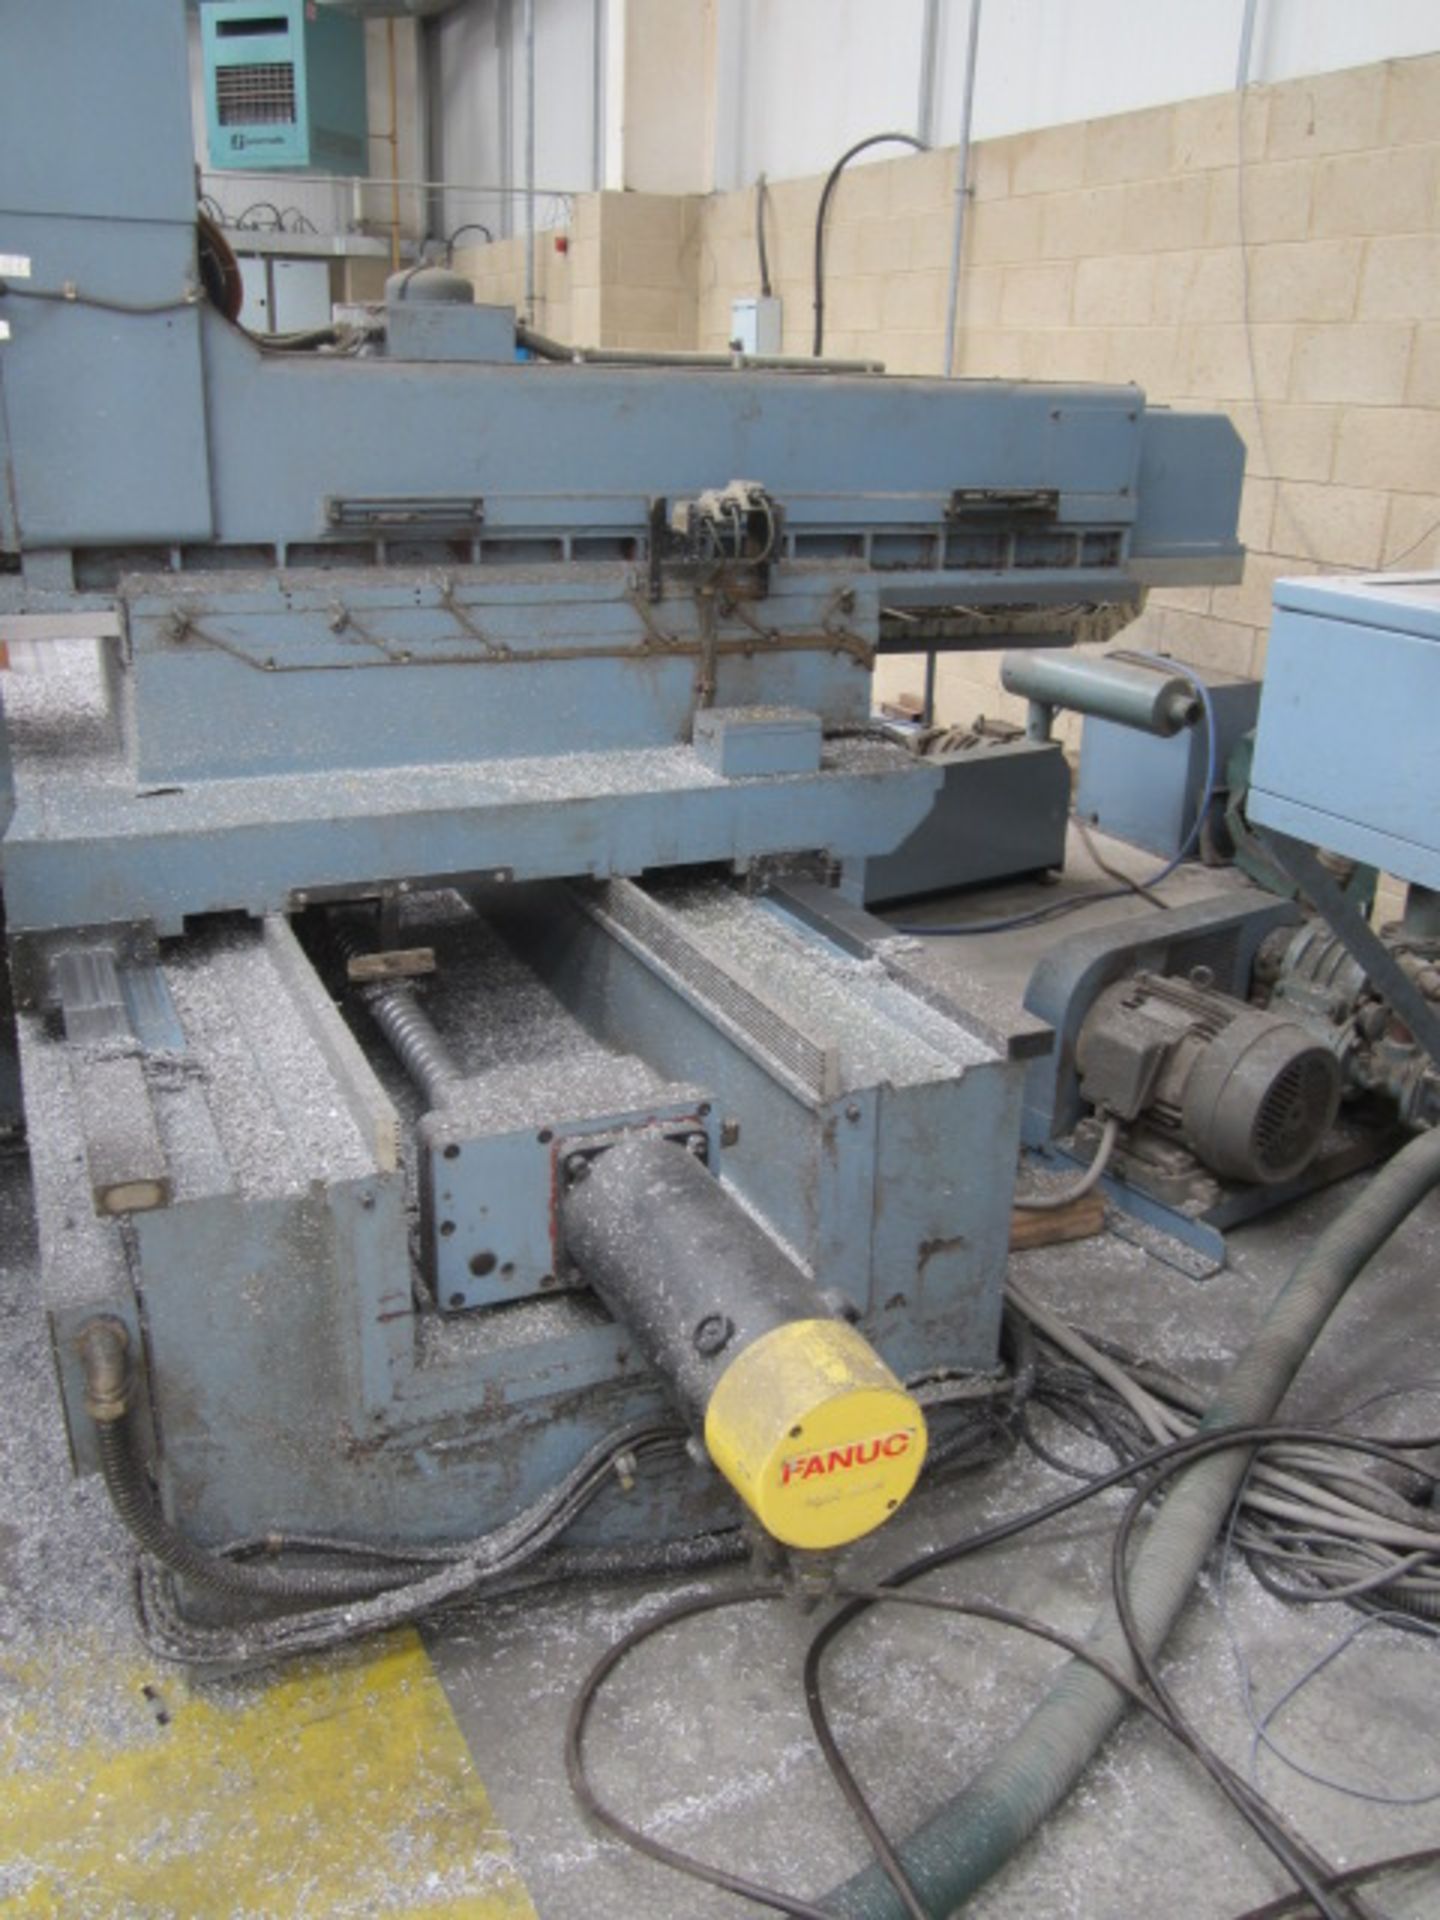 Heian NZ-2H CNC 2 head router, 3 axis, vacuum table size 3- 3000mm x 1000mm, serial no: 600615, - Image 16 of 23